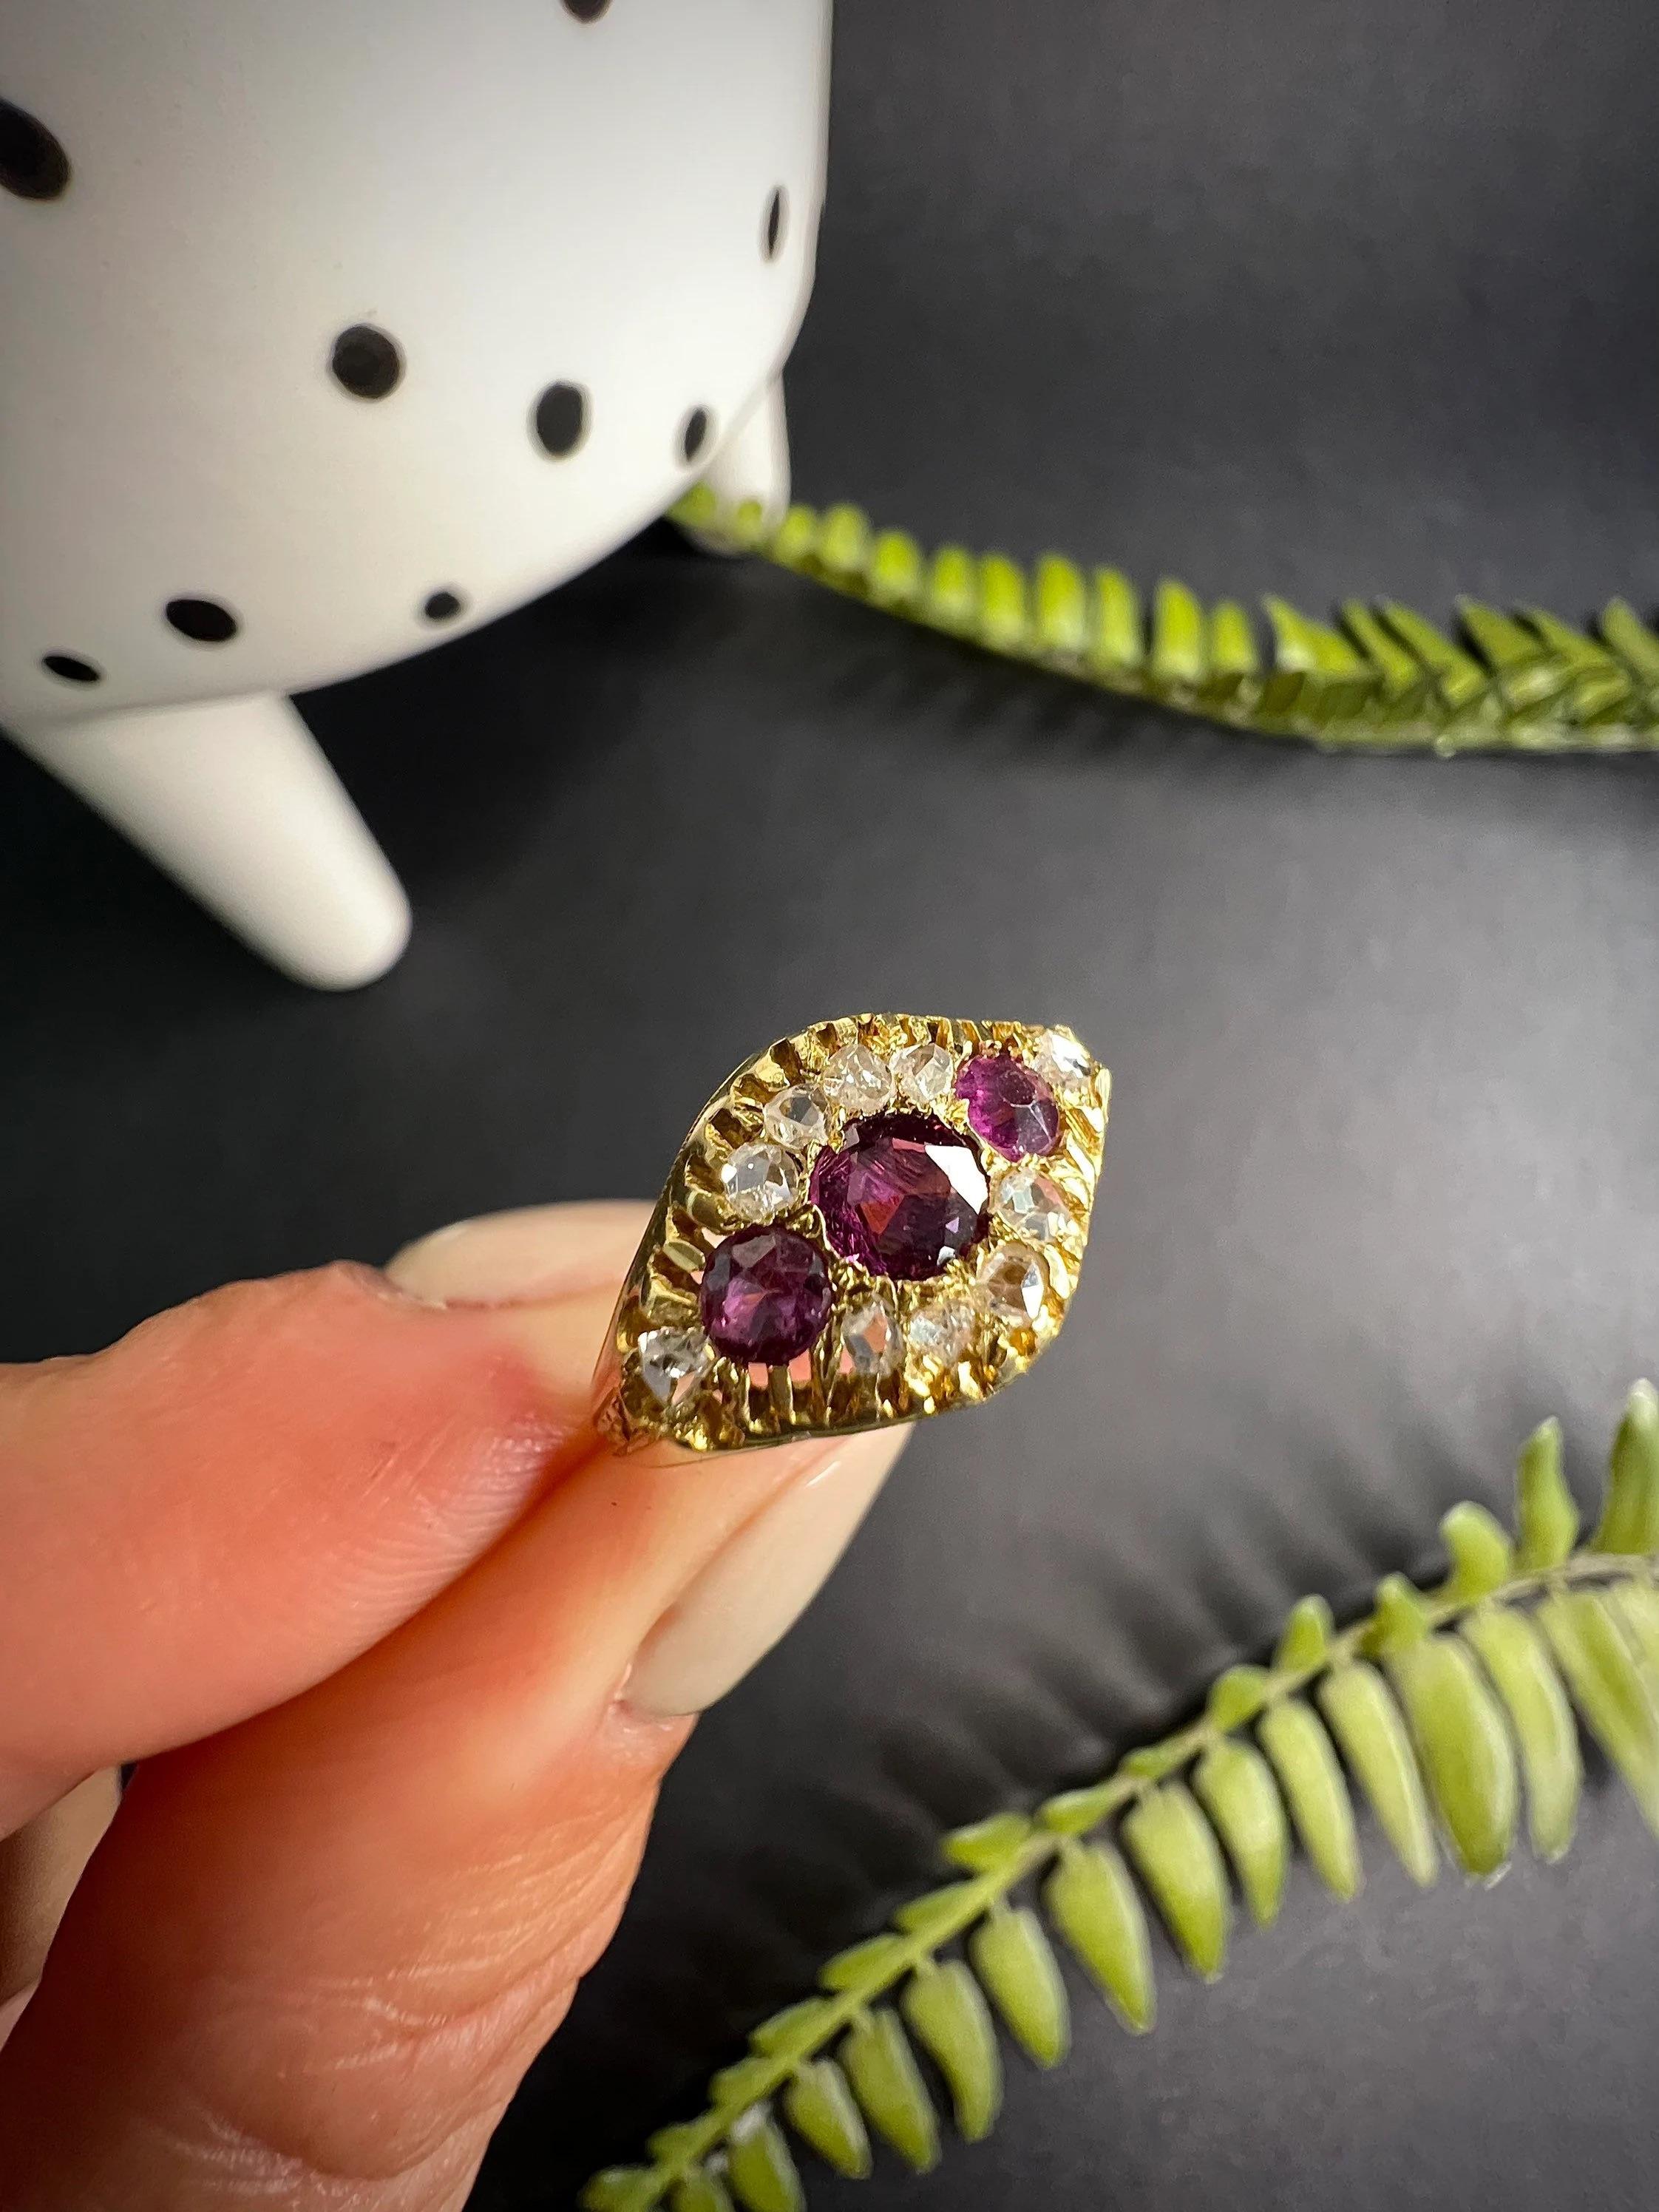 Antique Almandine Garnet Ring 

15ct Gold 

Hallmarked Birmingham 1899

Absolutely Stunning, Victorian Ring. Set with Gorgeous Almandine Garnets & Diamonds. 
The Detailing is Just Fabulous, From The Cage Work to The Intricate Patterned Shoulders &